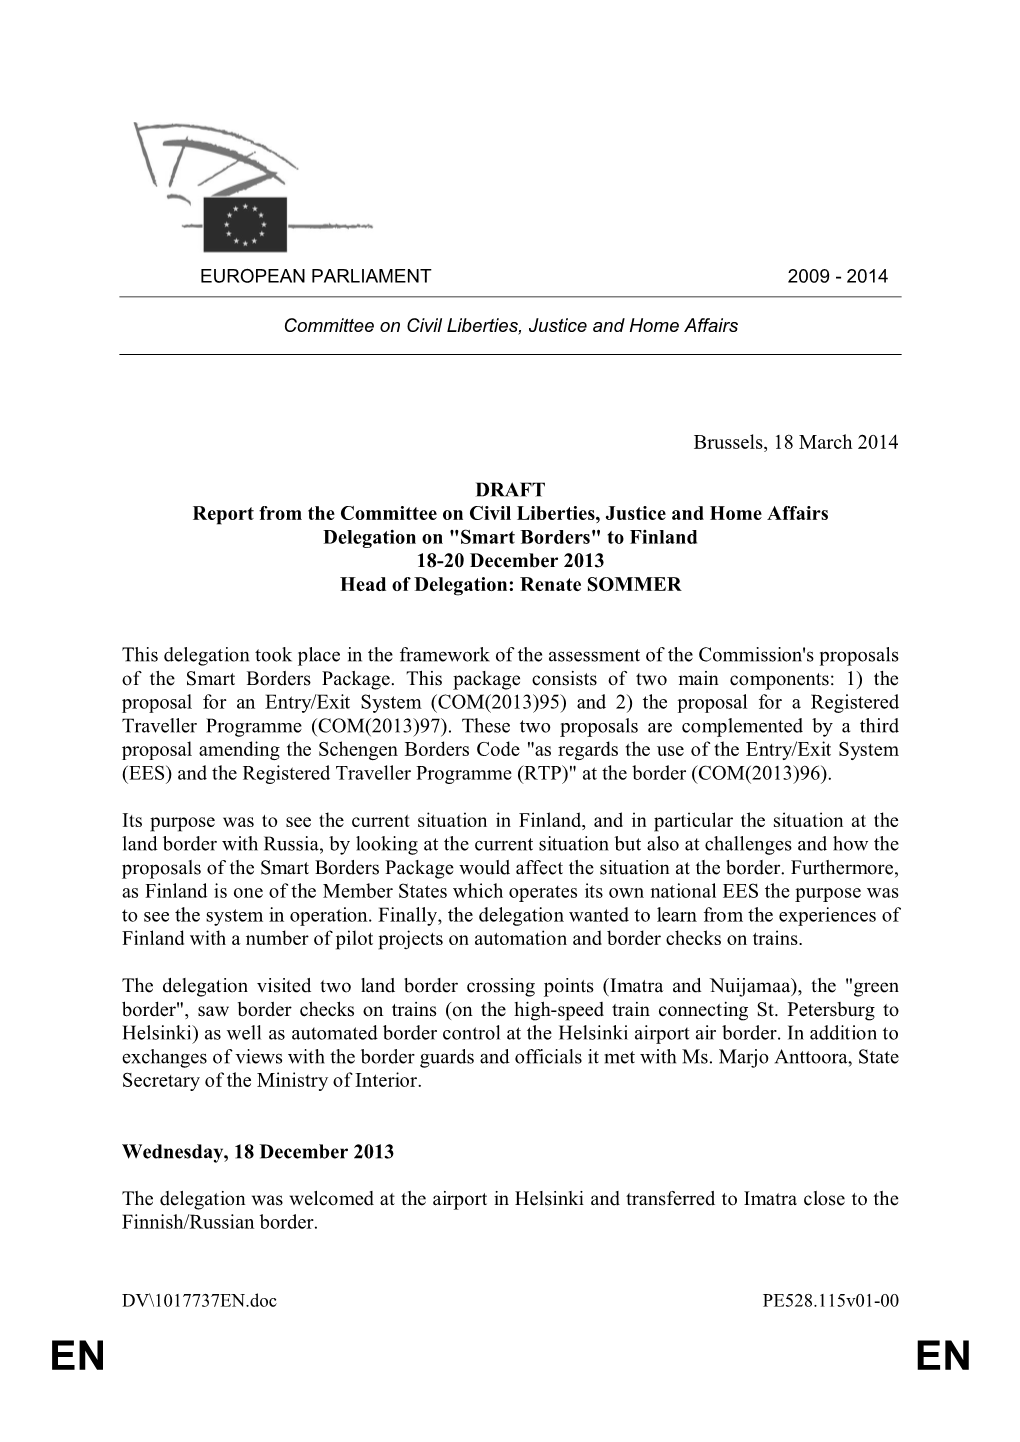 Brussels, 18 March 2014 DRAFT Report From